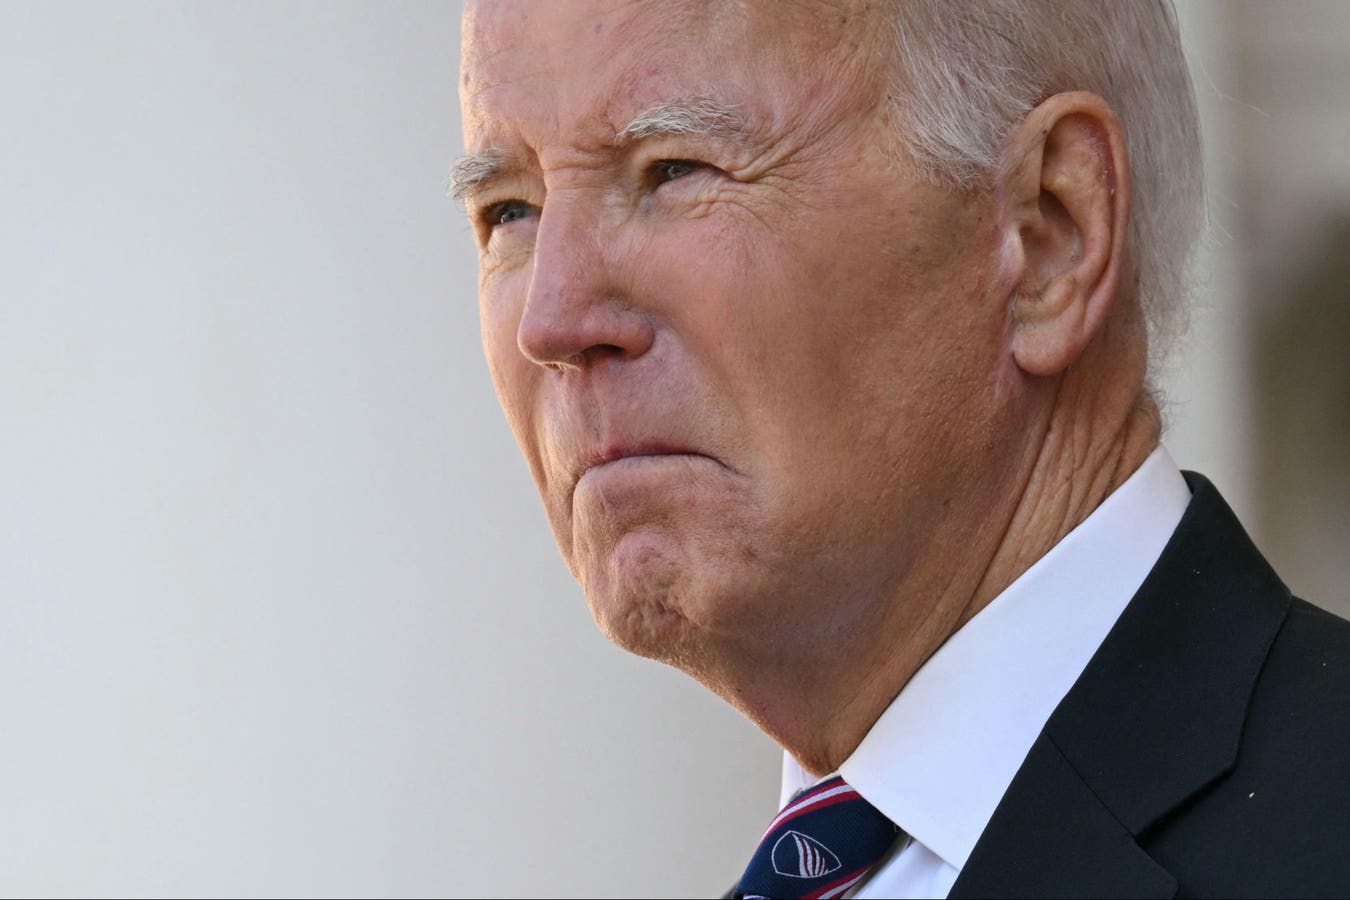 biden trails trump in these 7 key swing states—as most key biden voters say he’s too old, poll finds